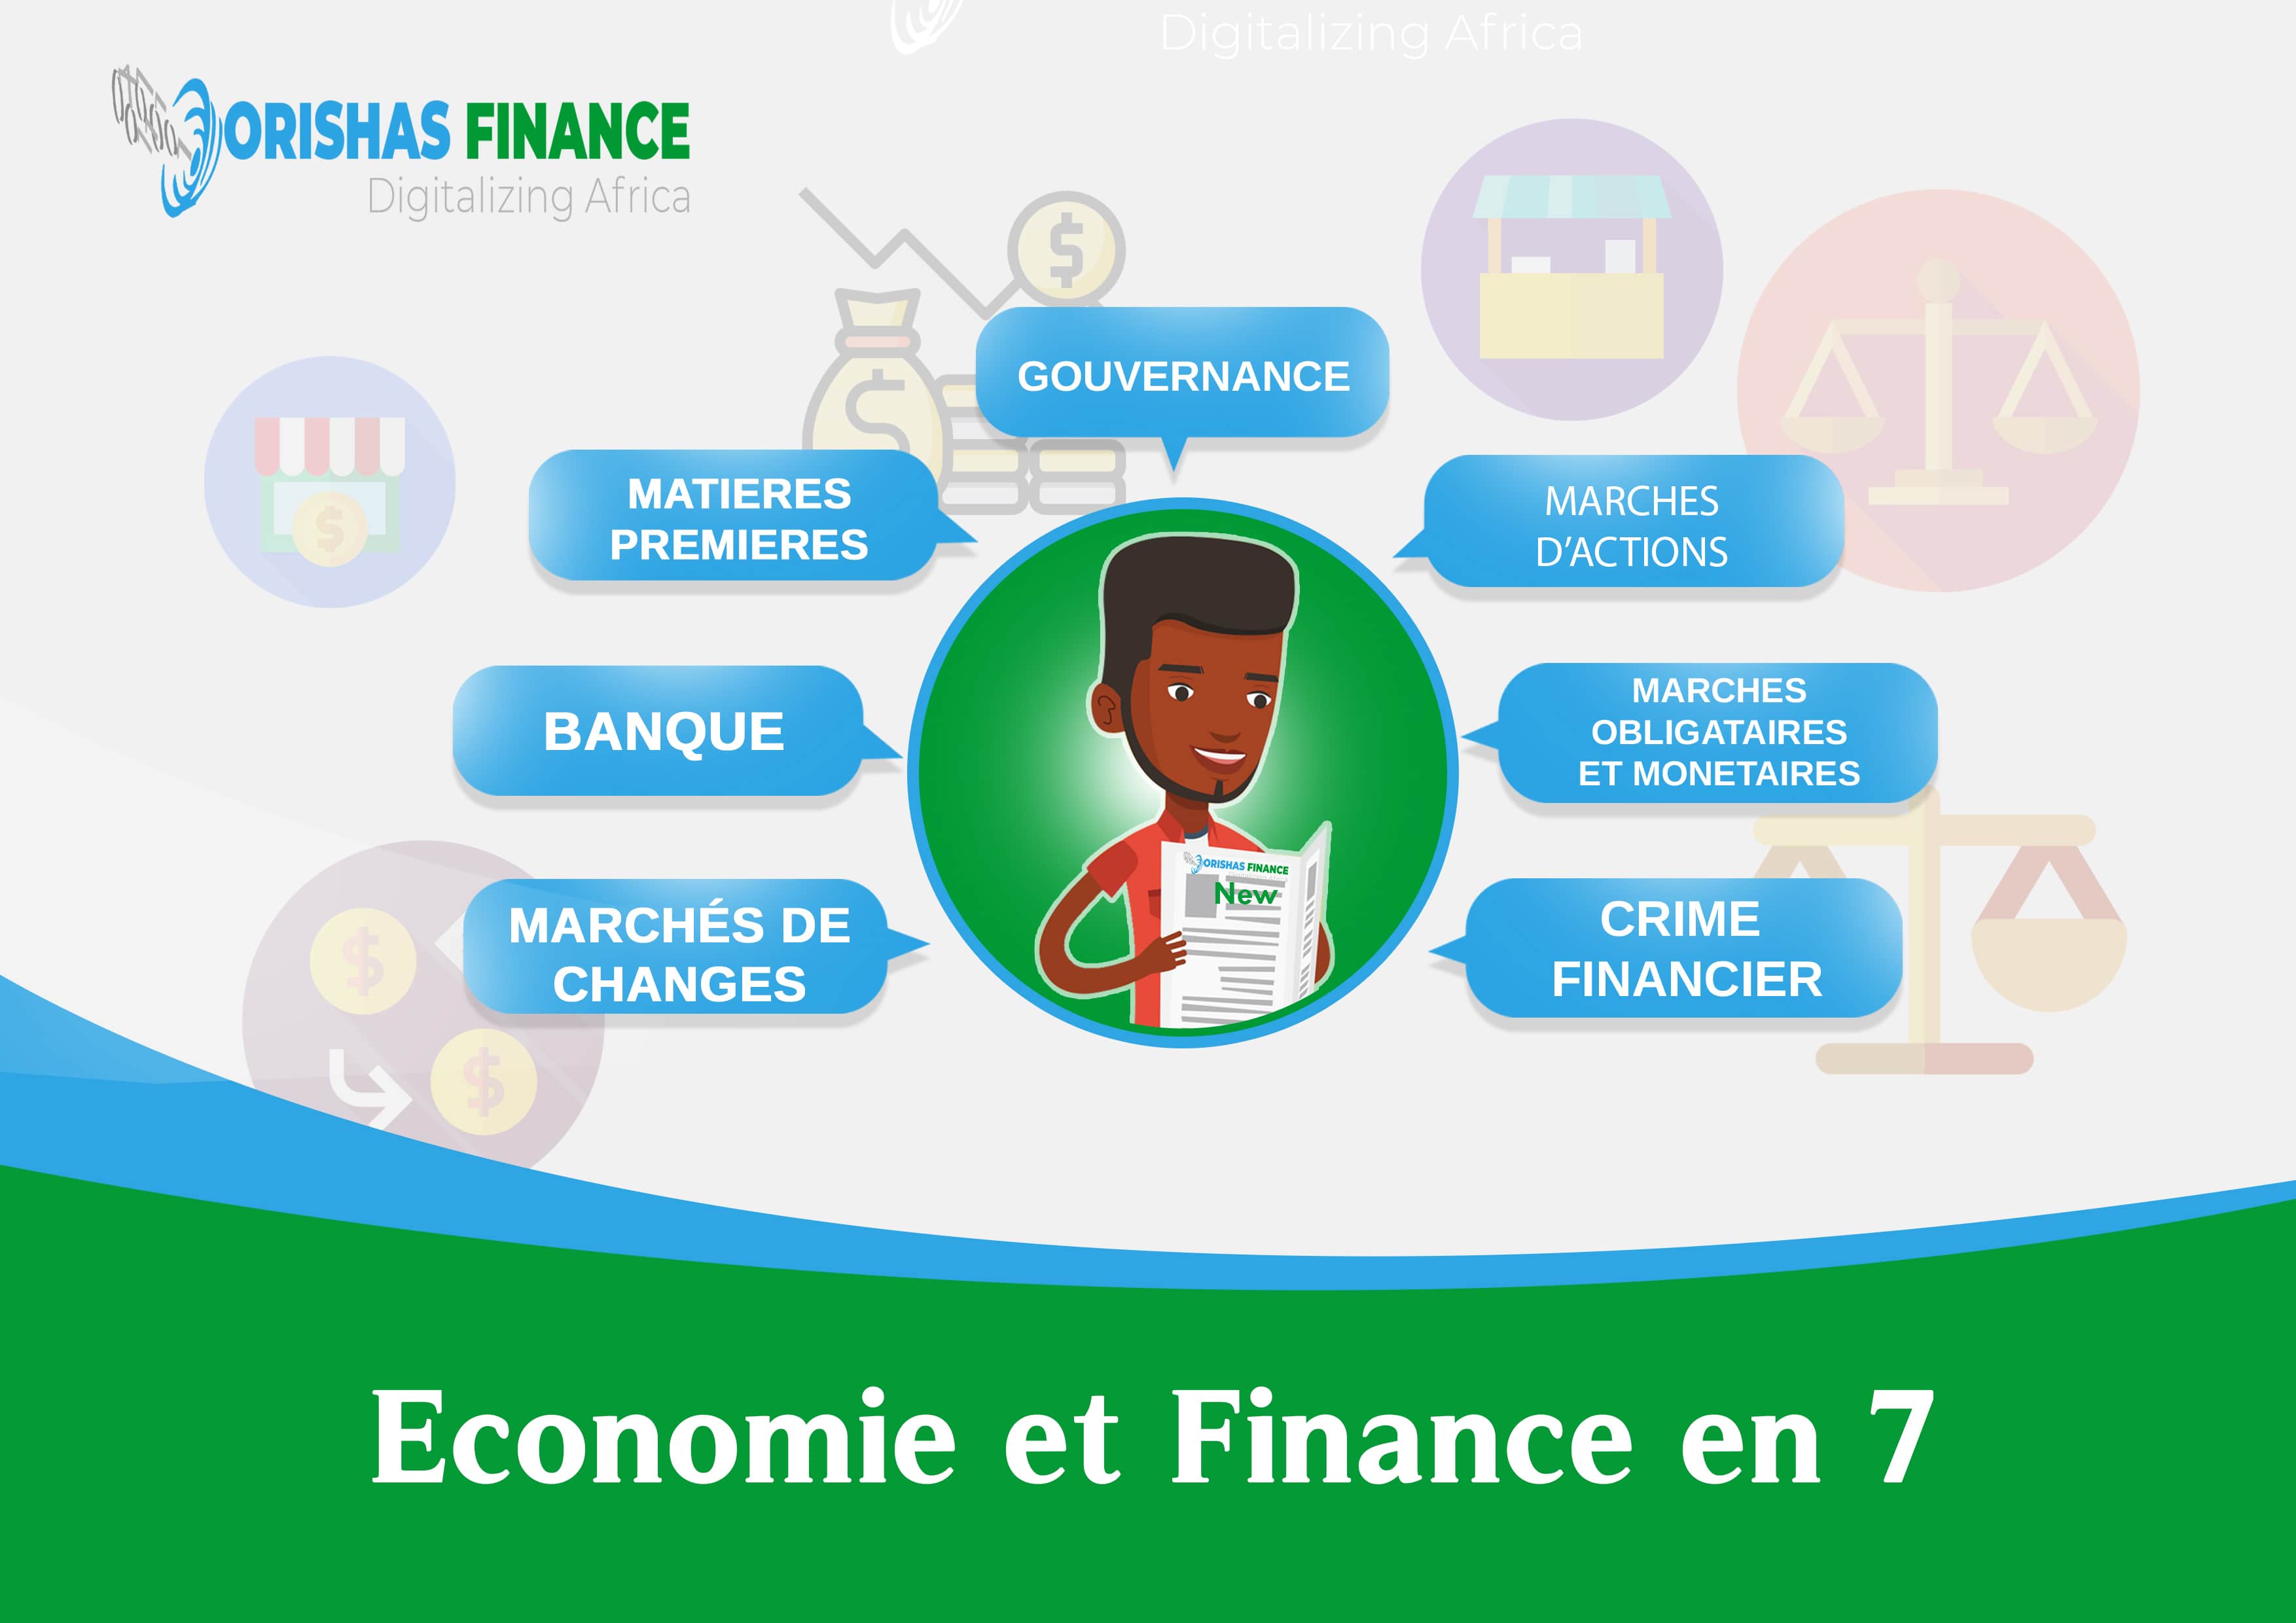  Economy and finance in 7 from April 26 to 30, 2021 